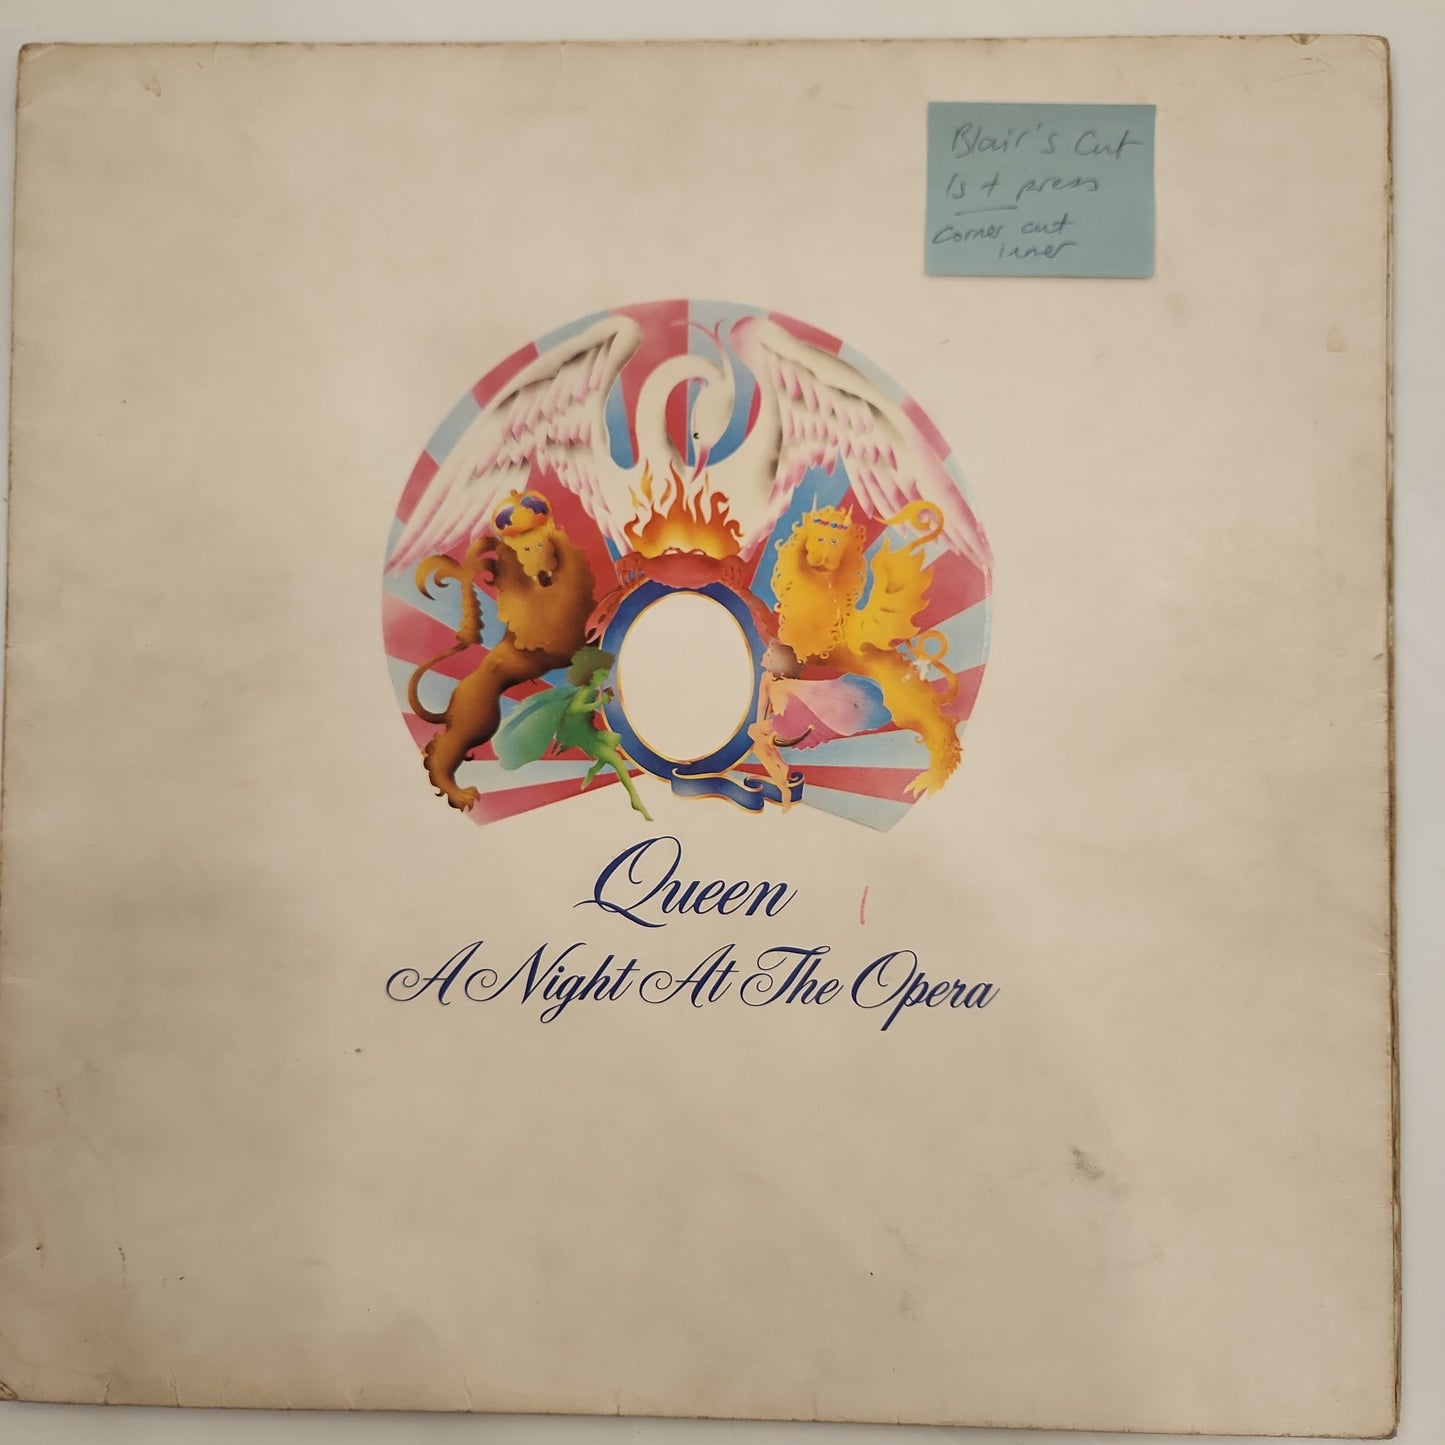 Queen - A Night At The Opera (S)